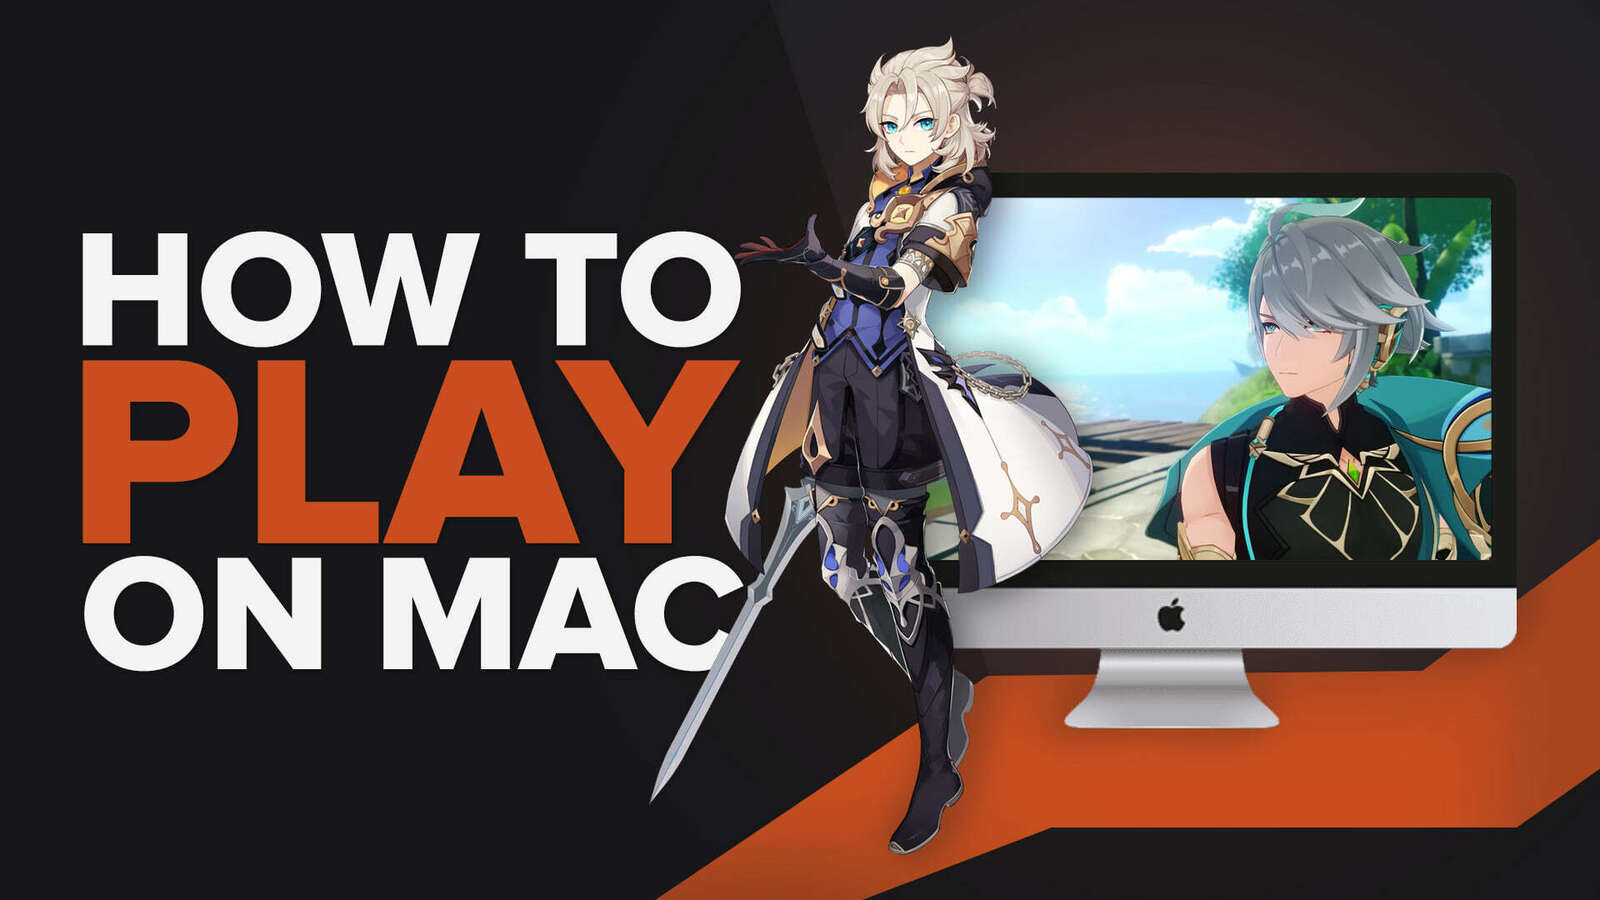 How to Play Genshin Impact on Mac [Visualized Step-By-Step Guide]